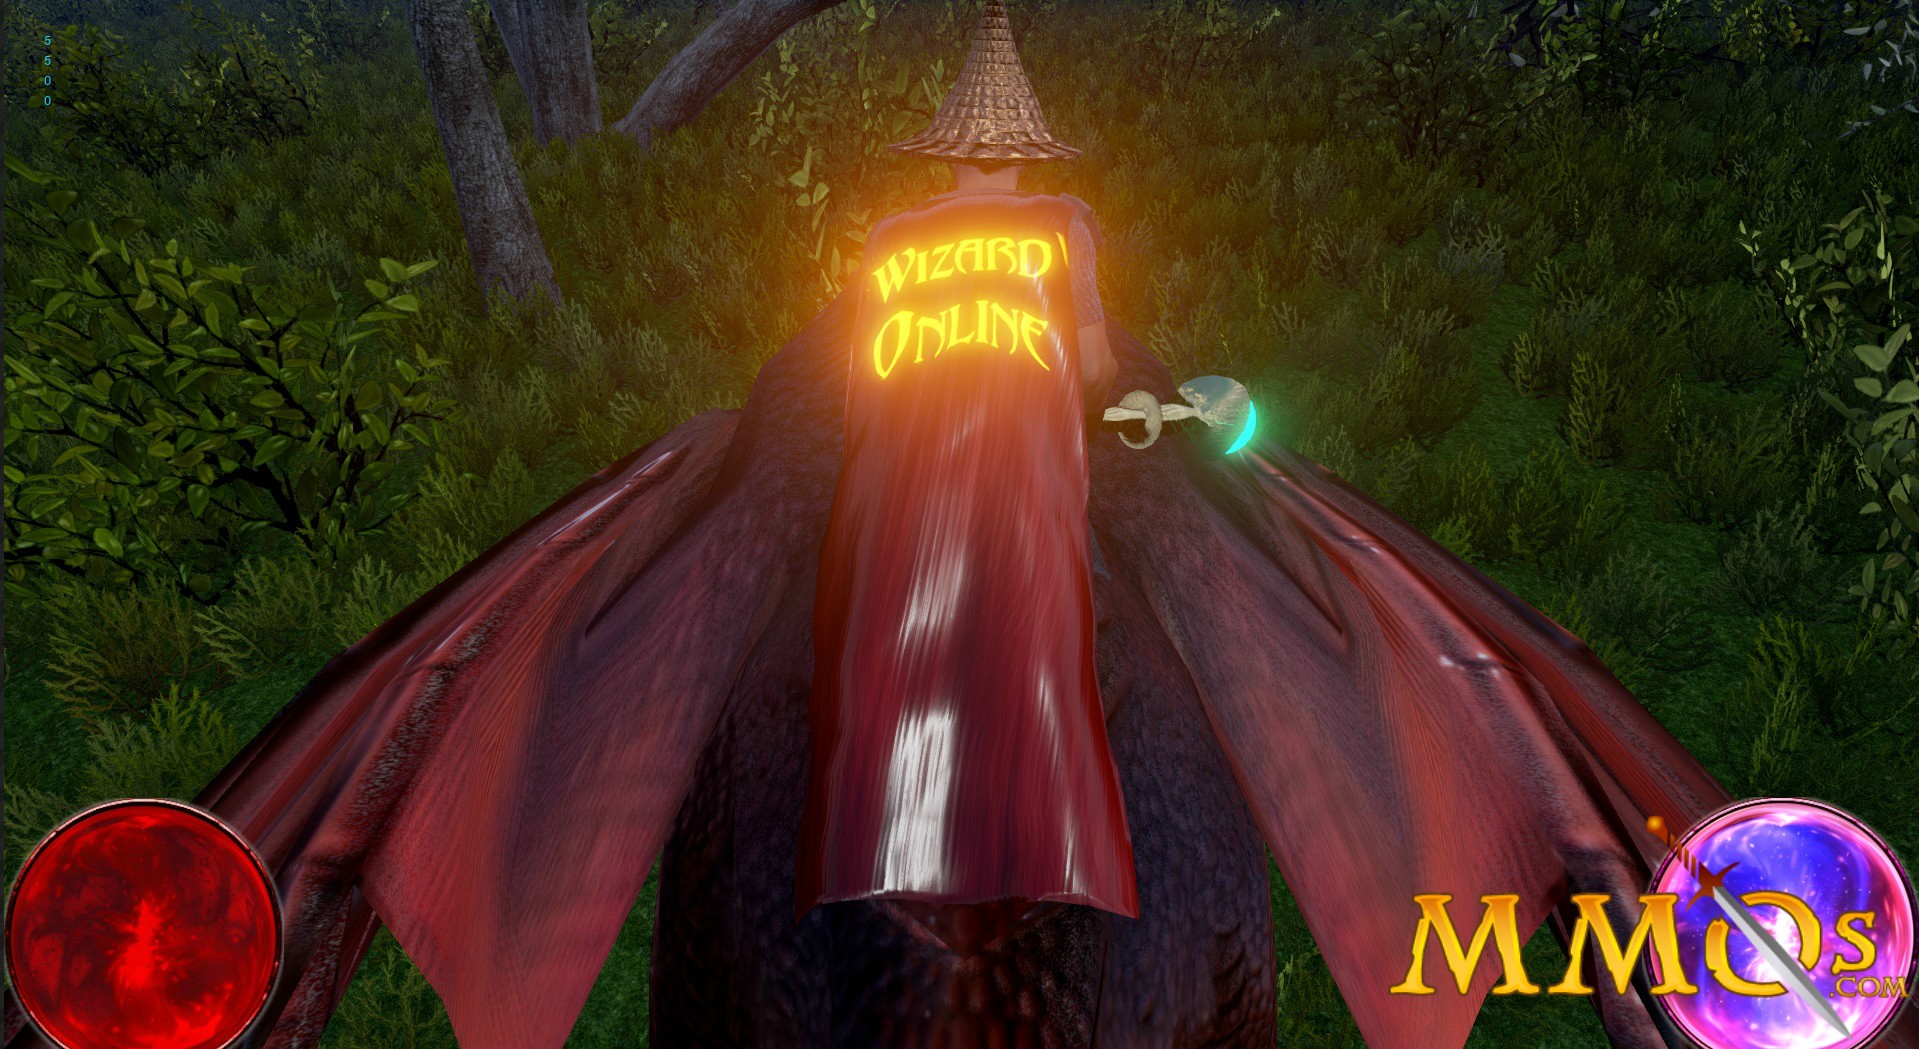 Wizard Online Virtual Reality Open World Game image - IndieDB